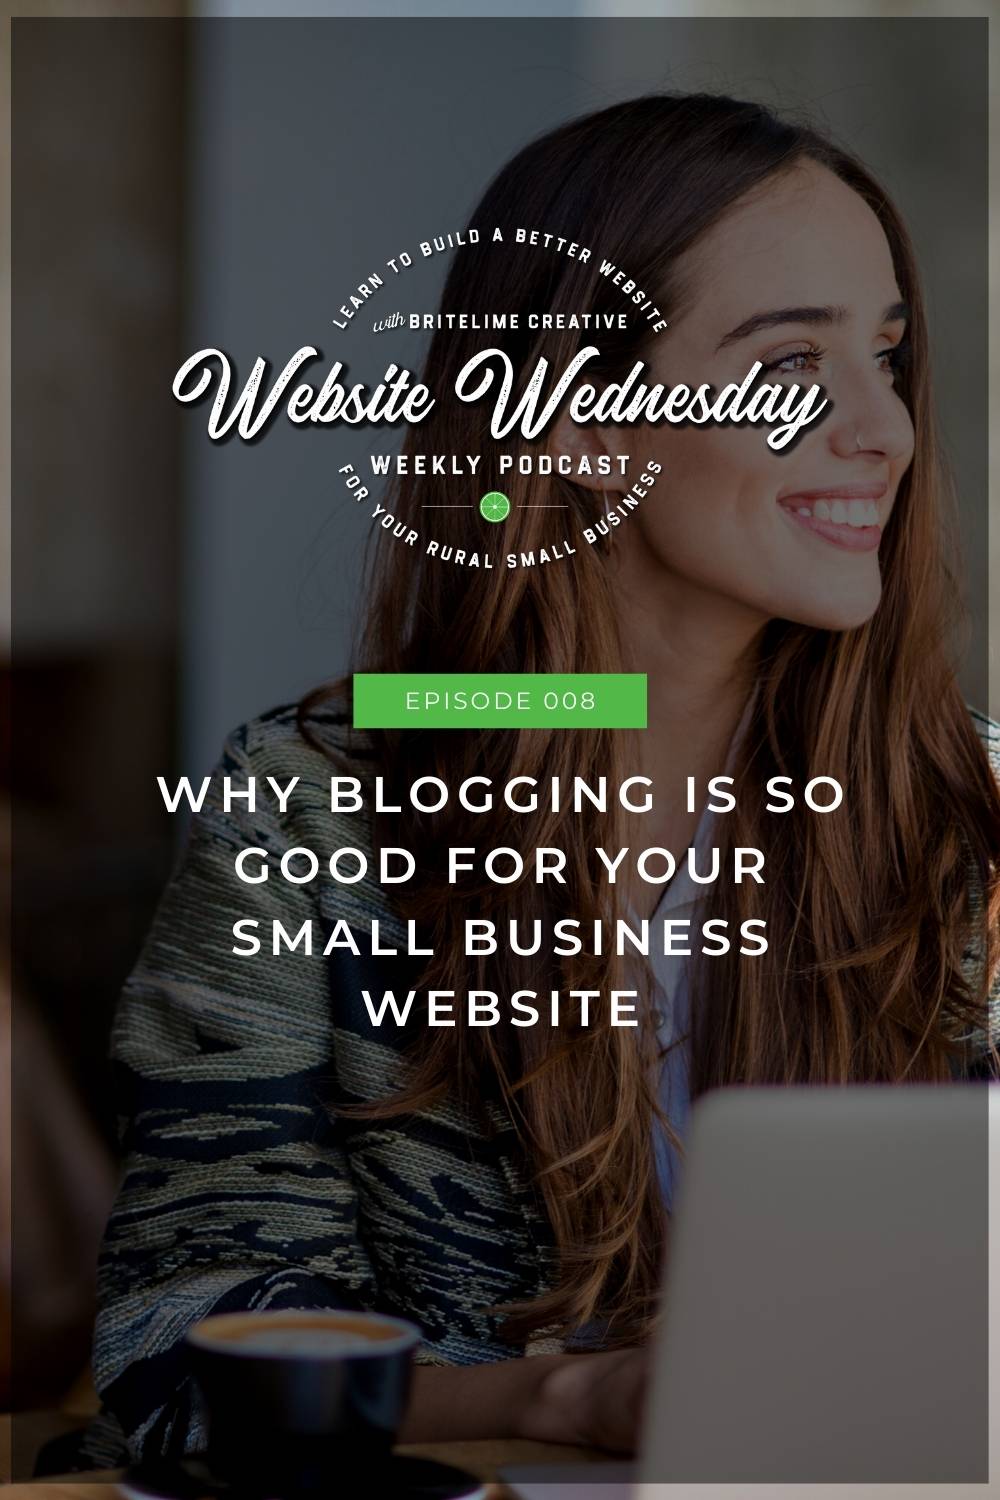 Cover of episode 008 of the Website Wednesday podcast featuring a woman sitting at a laptop with a cup of coffee working on her blog. Includes the Website Wednesday logo and text that reads: Episode 008 Why Blogging is So Good for Your Small Business Website